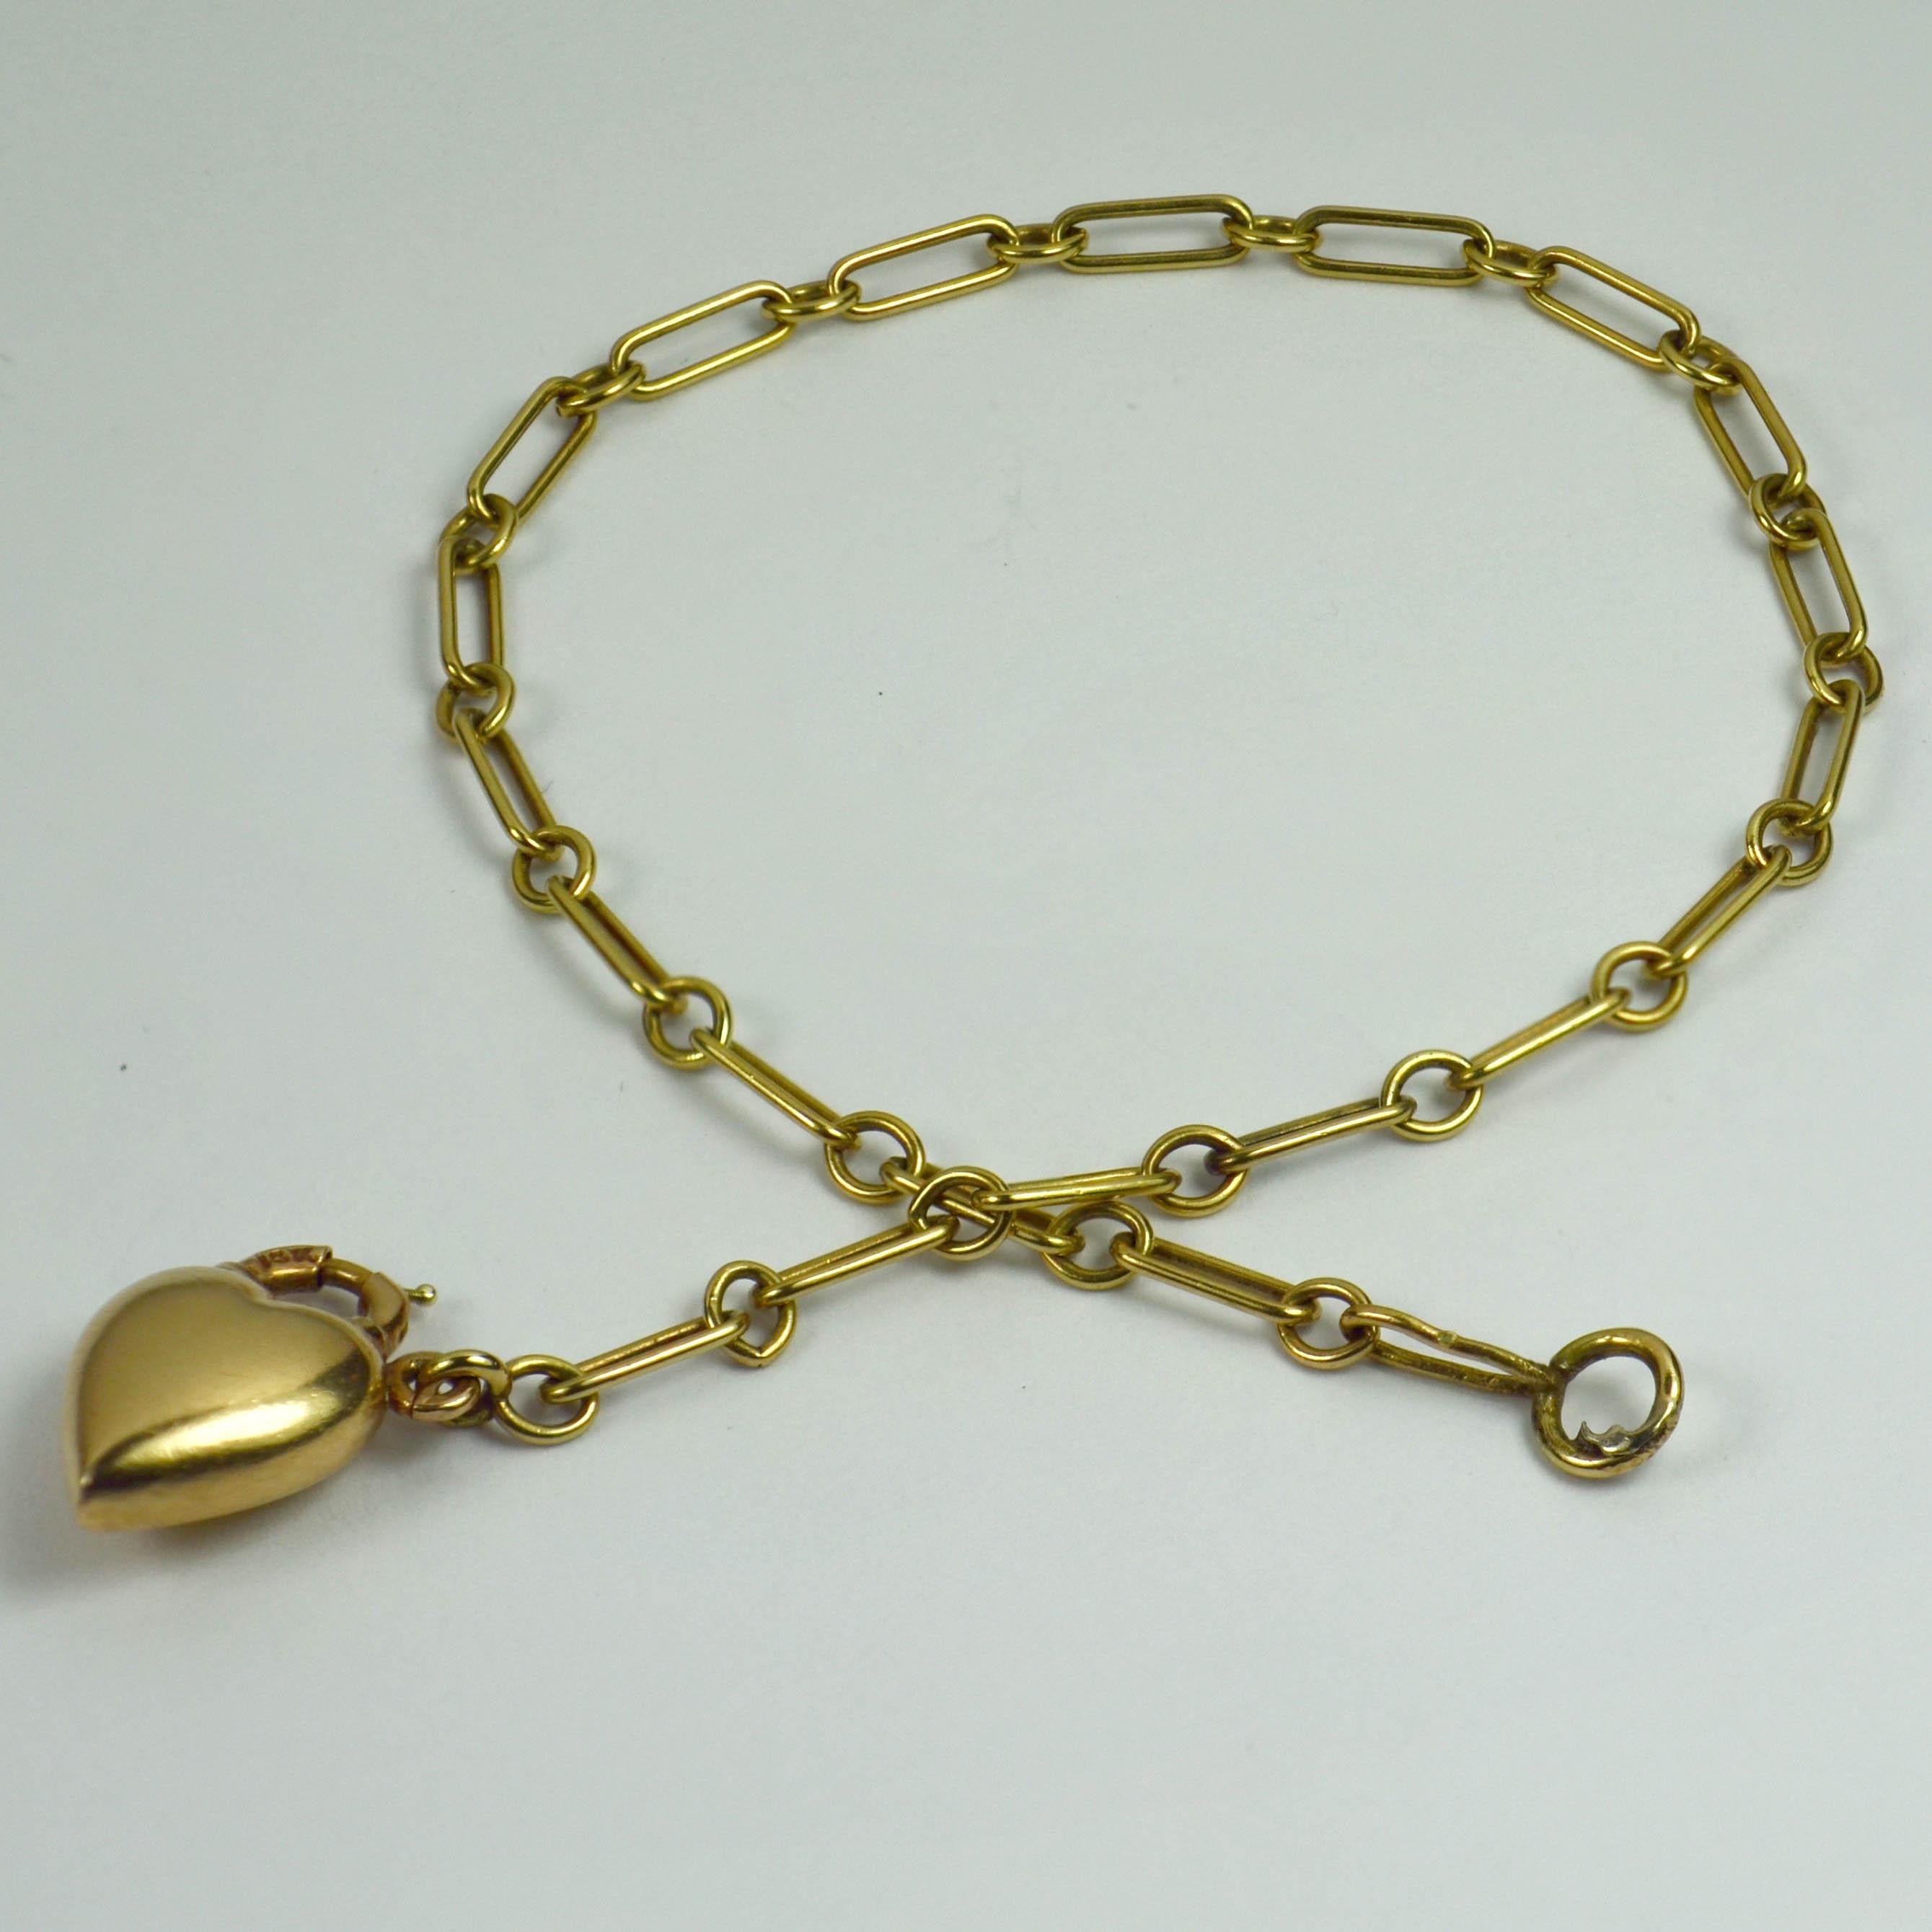 Yellow Gold Chain Link Bracelet with Puffy Heart Padlock Charm Pendant In Good Condition For Sale In London, GB